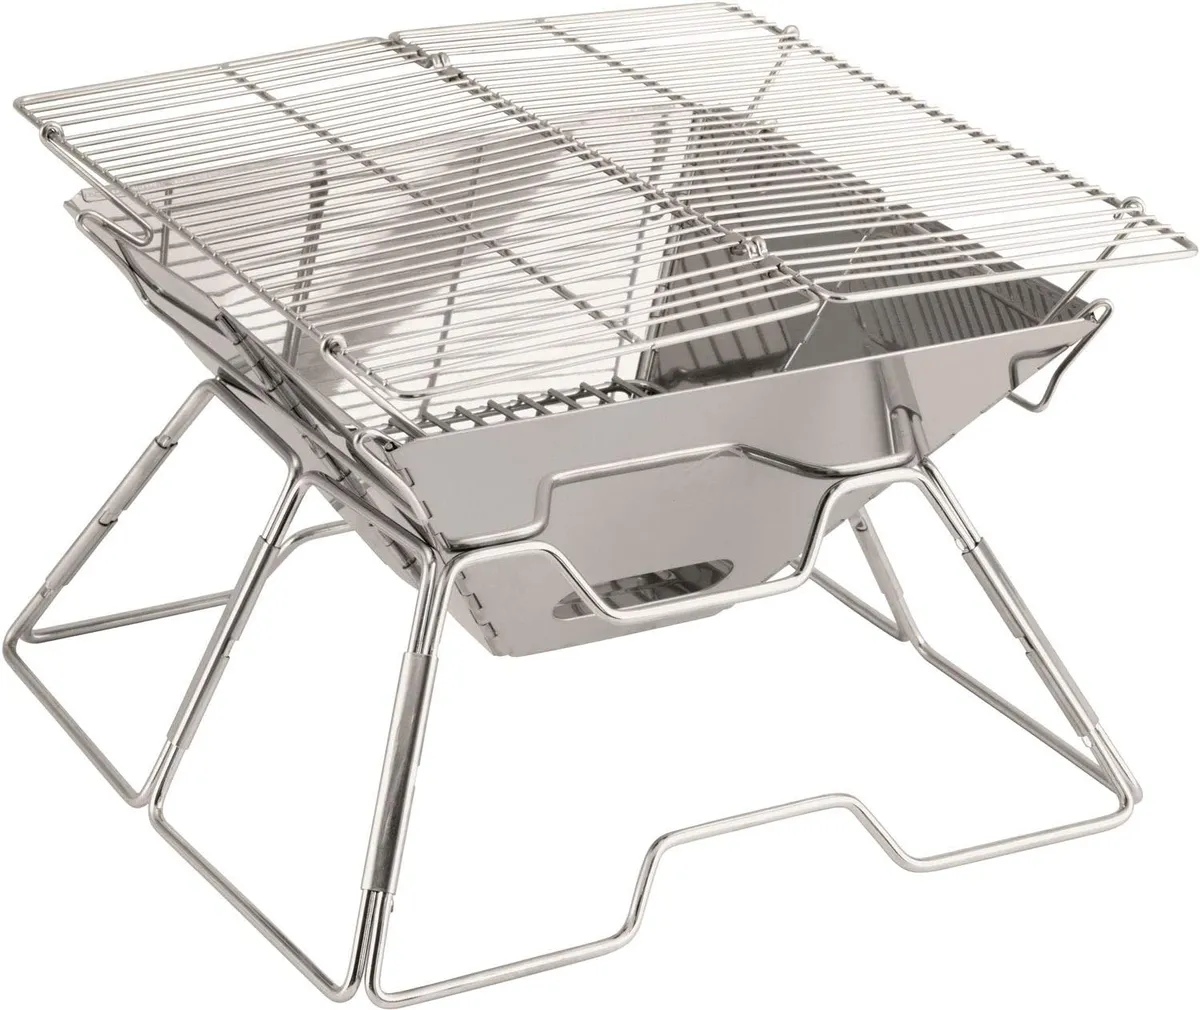 Robens Wayne firepit and grill